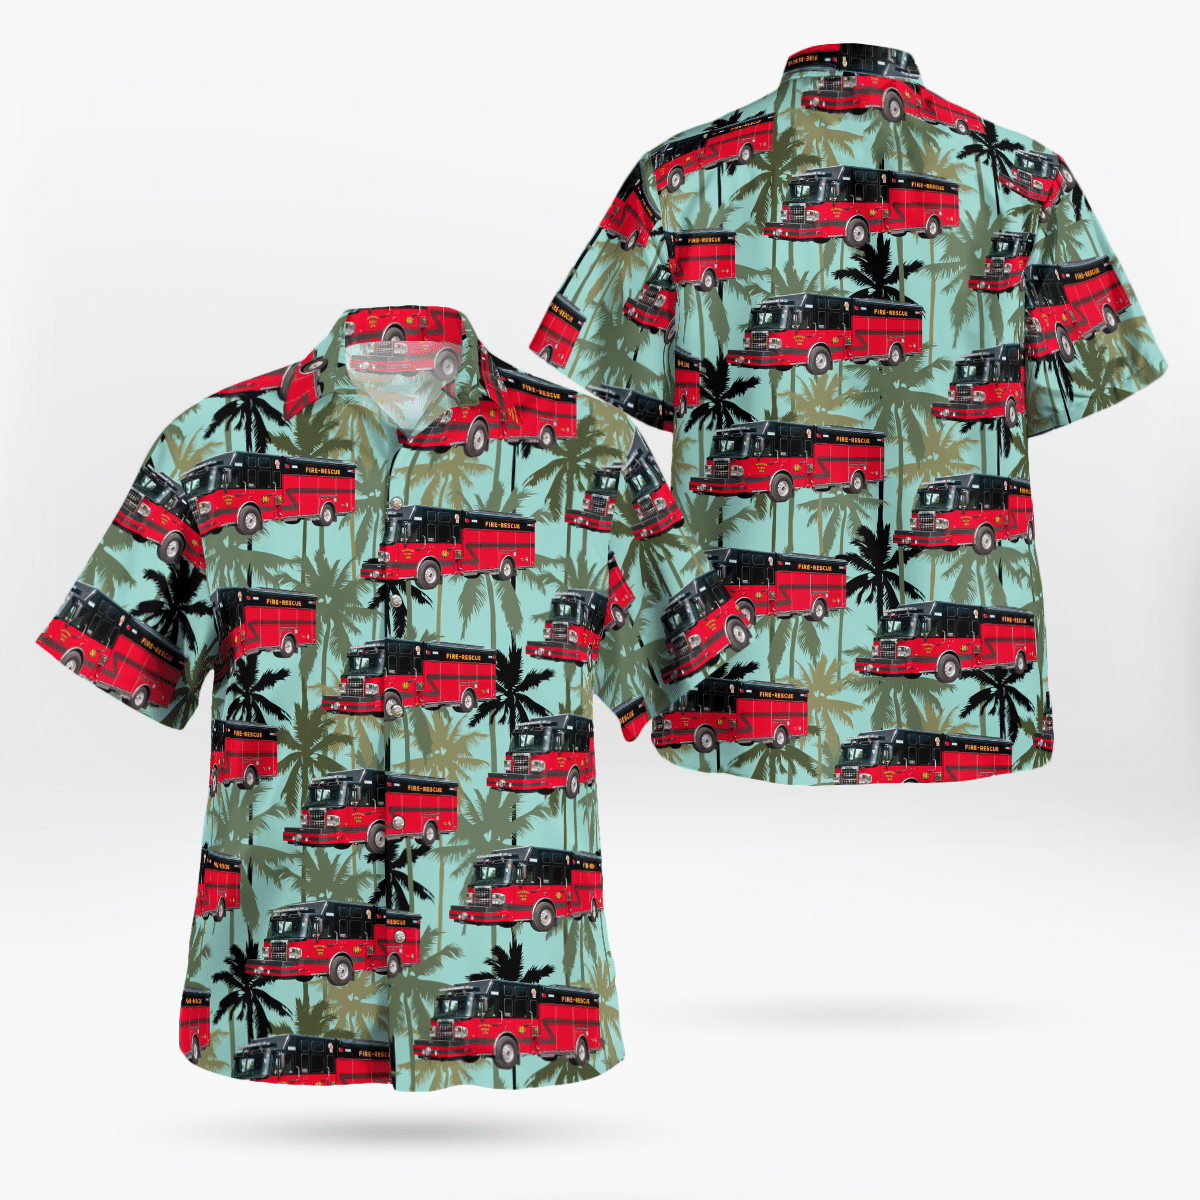 Discover A Great Place To Shop For An Affordable Hawaiian Shirt Word2